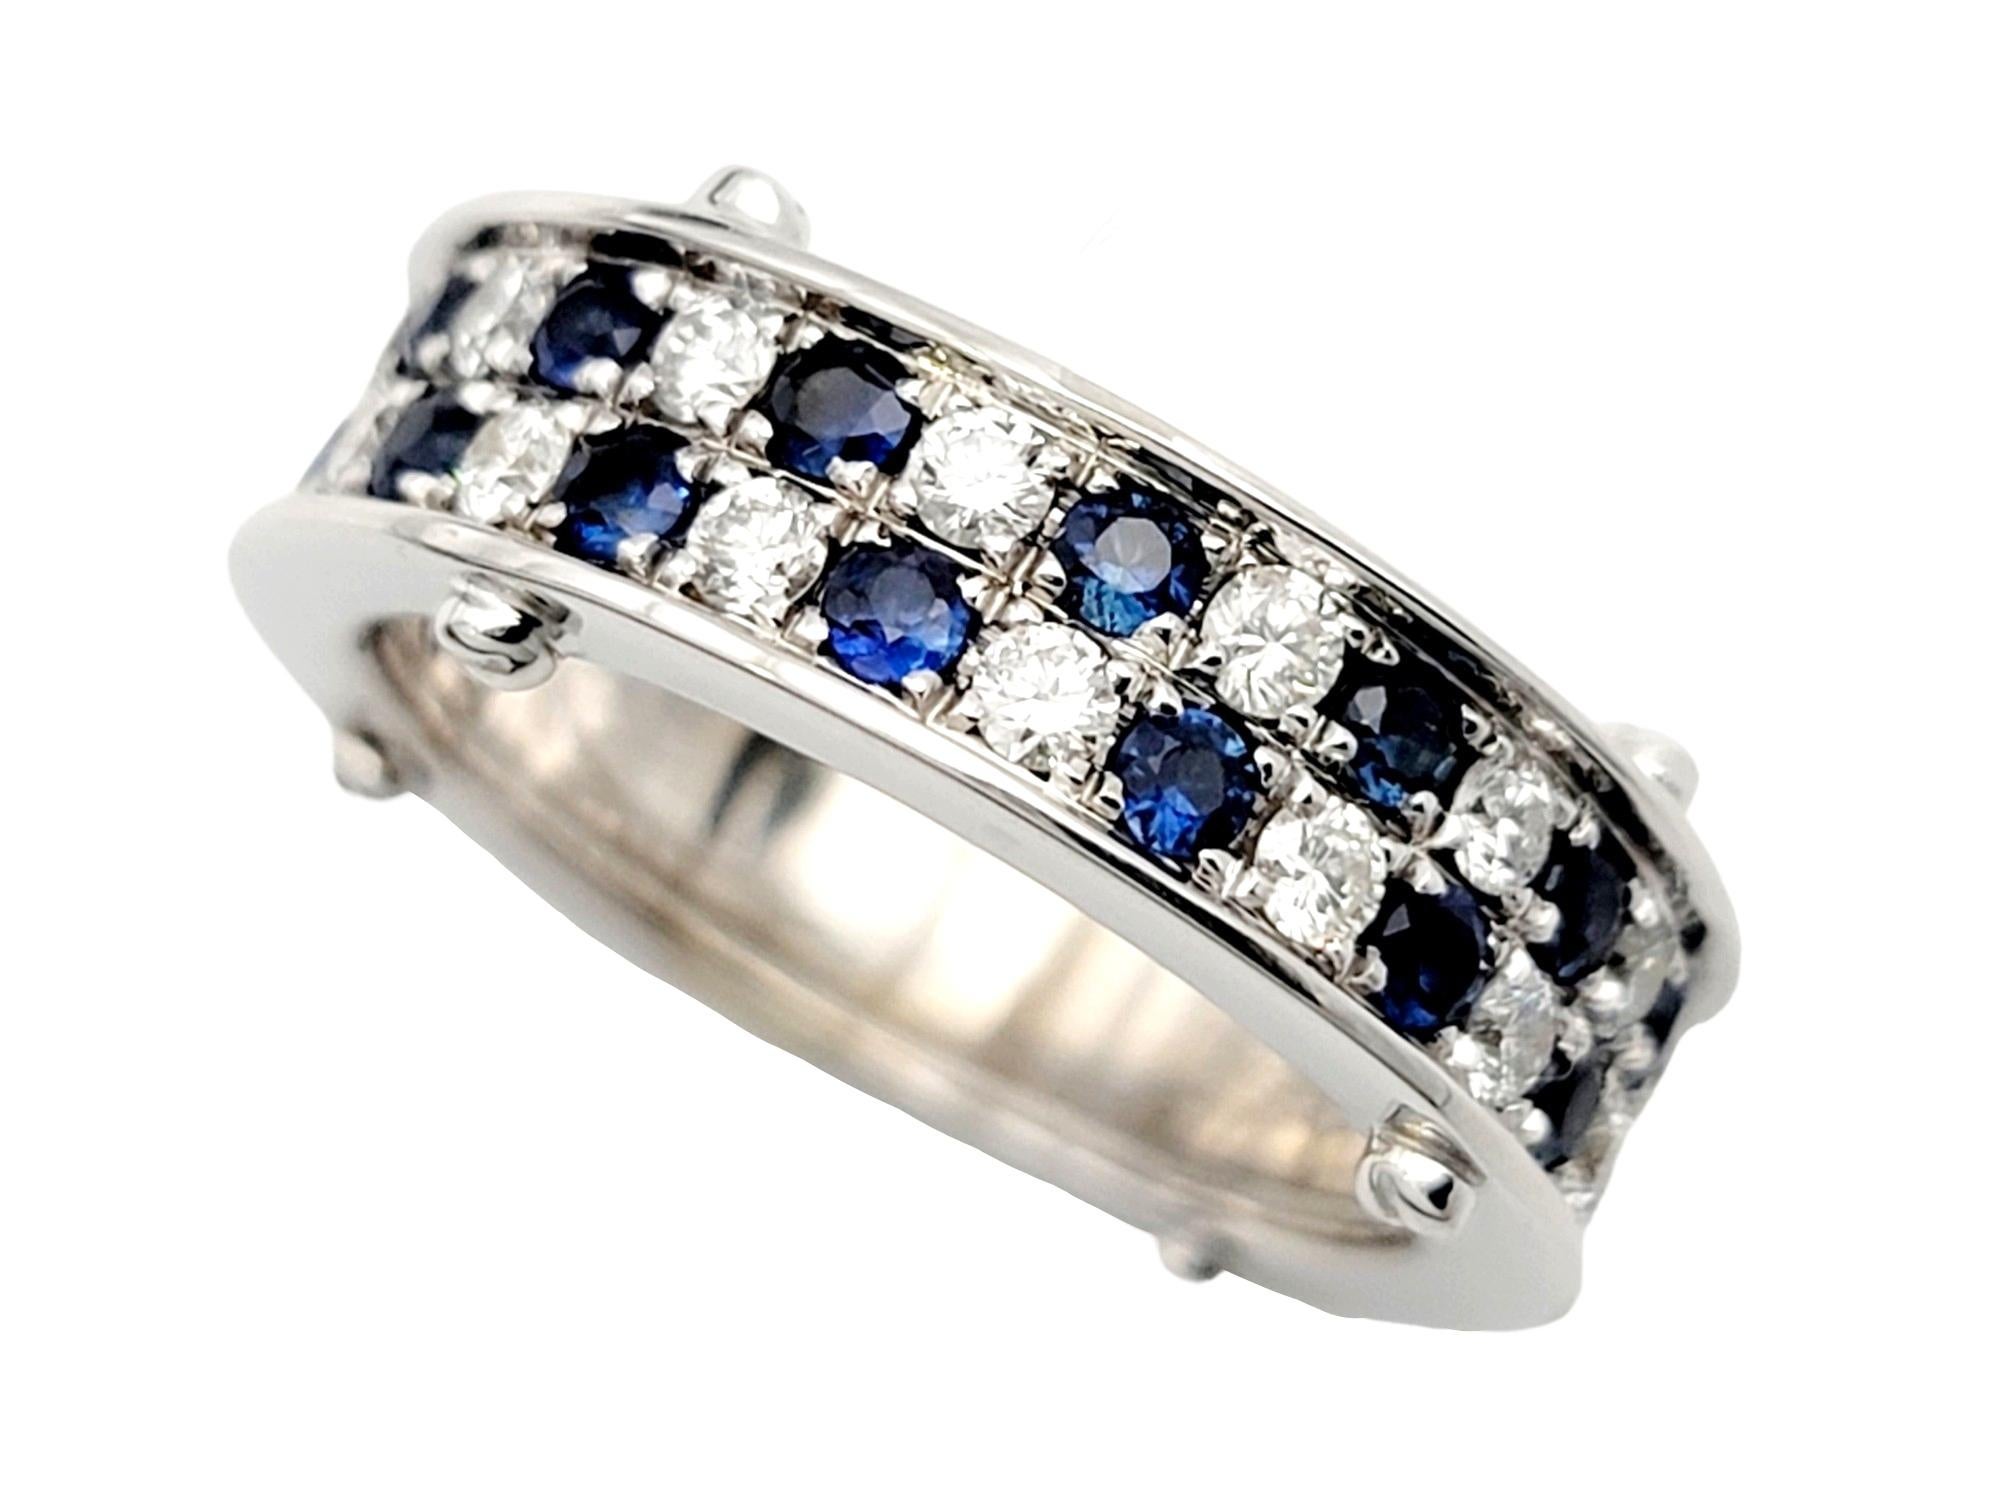 Ring size: 7

This captivating ring features a beautiful blend of sapphires and diamonds to create an elegant and sophisticated piece you will absolutely cherish.  

This unique multi-row band ring features a stunning checkerboard pattern,